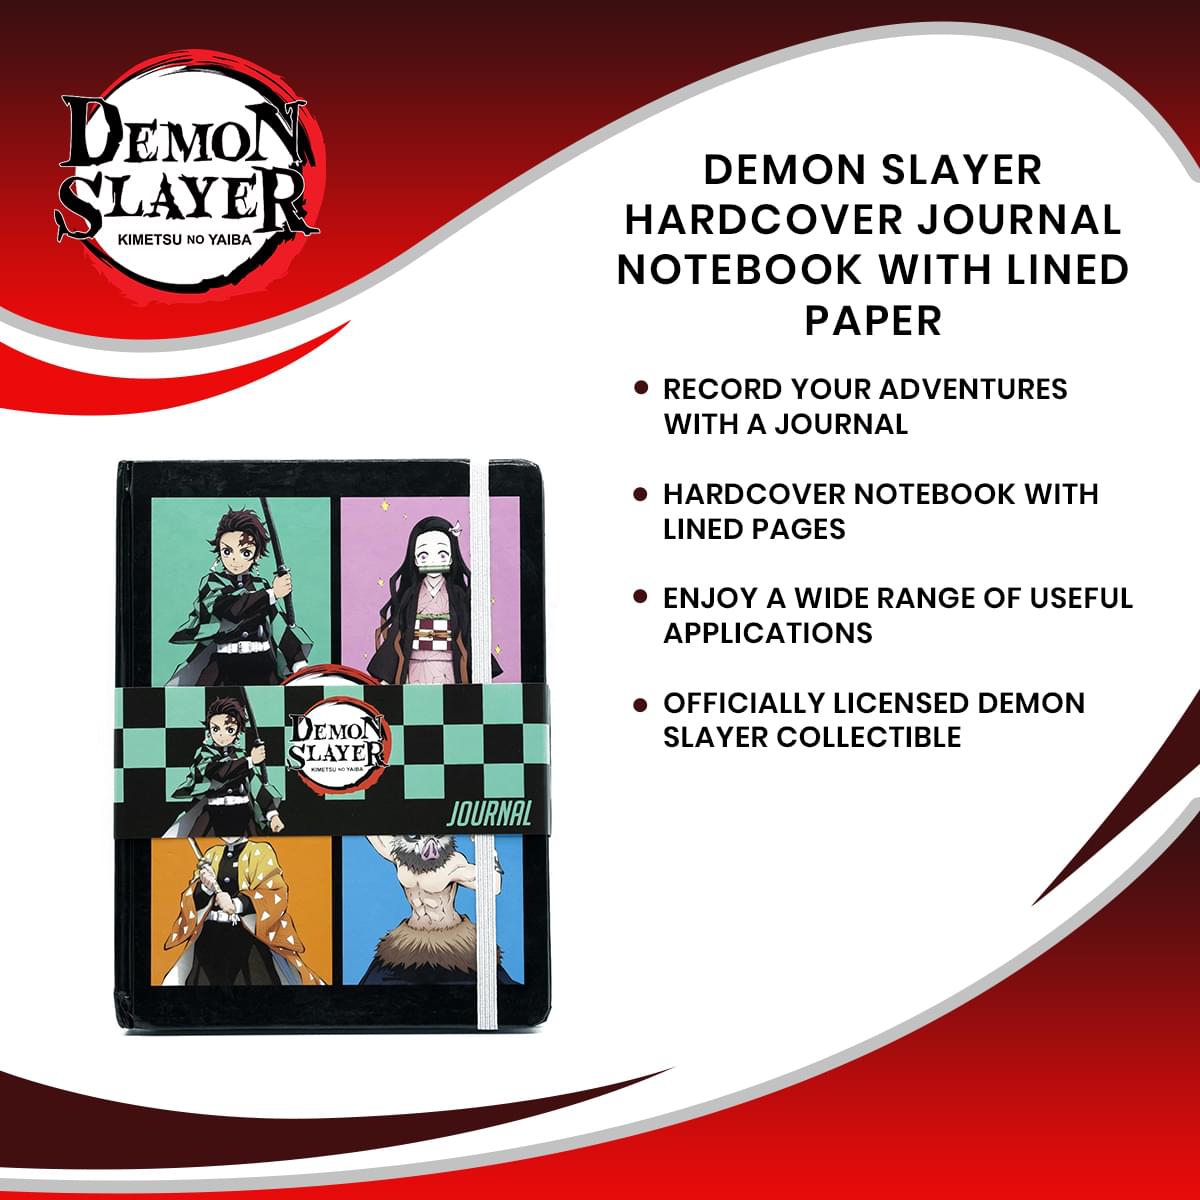 Demon Slayer Hardcover Journal Notebook With Lined Paper